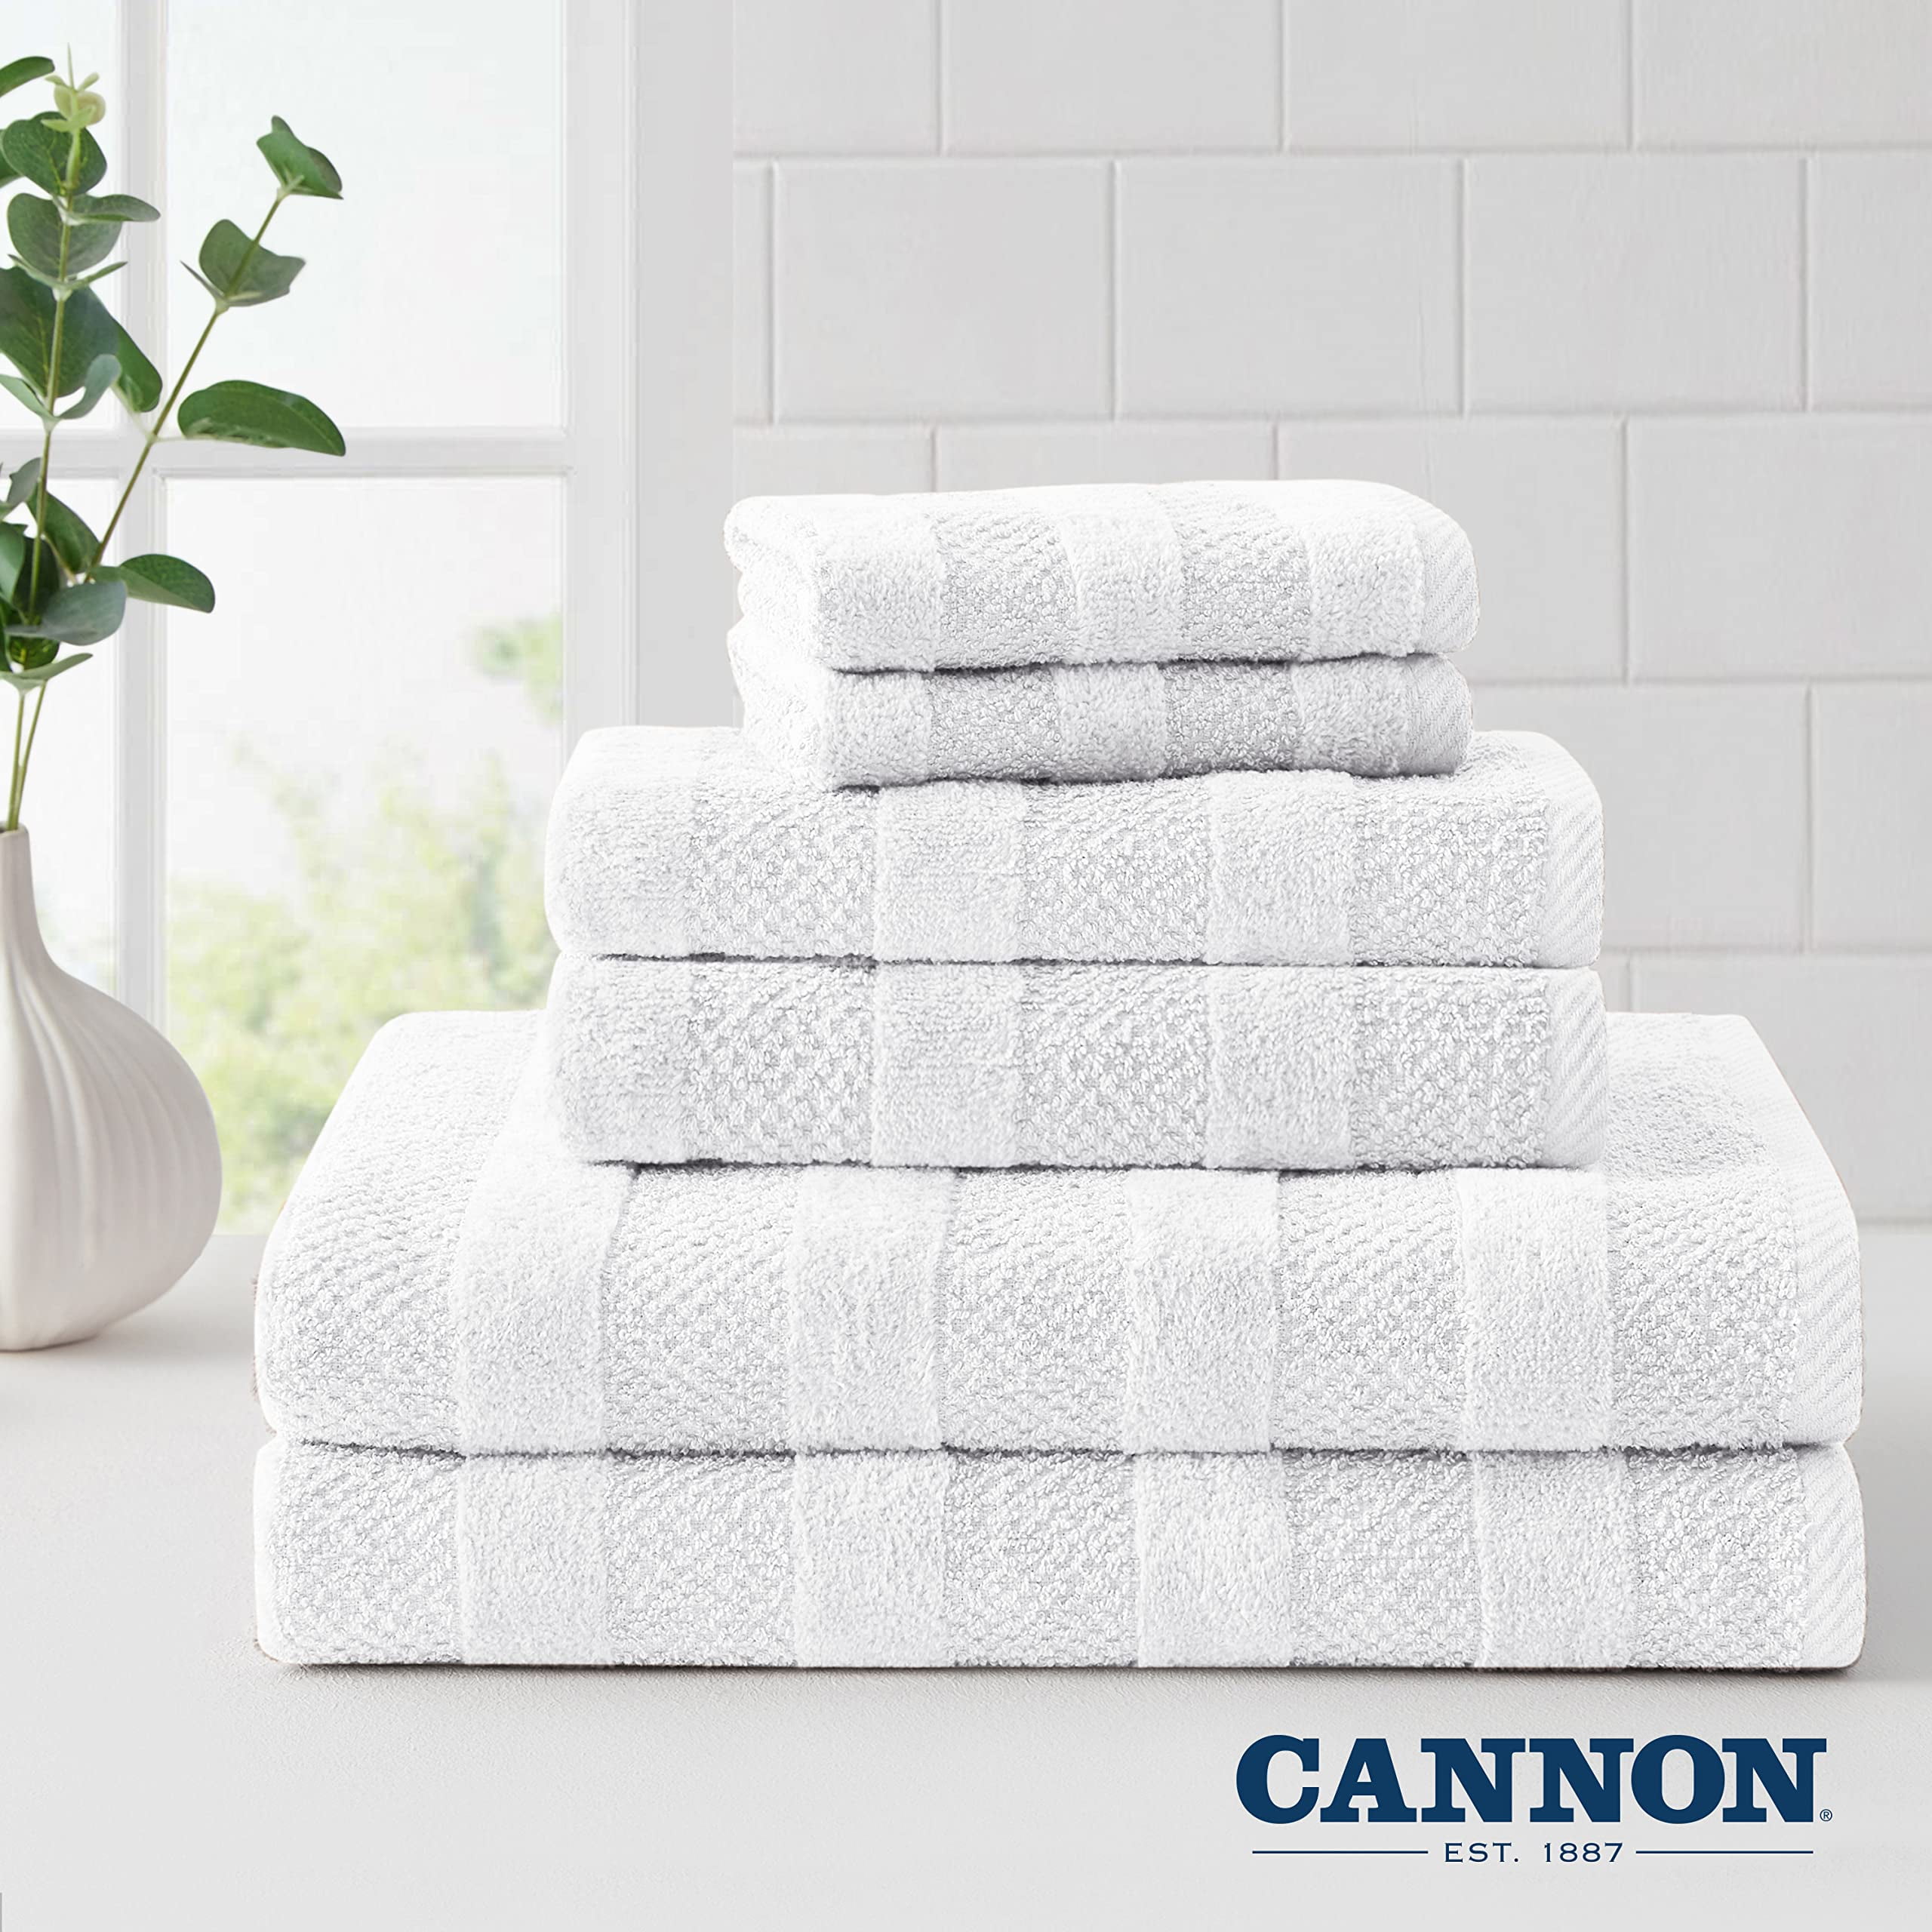 CANNON Luxury 100% Cotton Zero Twist Hand Towels (16 L x 28 W), 500 GSM,  Aero Spun, Dobby Hemmed Borders, Super Soft, Thick & Highly Absorbent, Easy